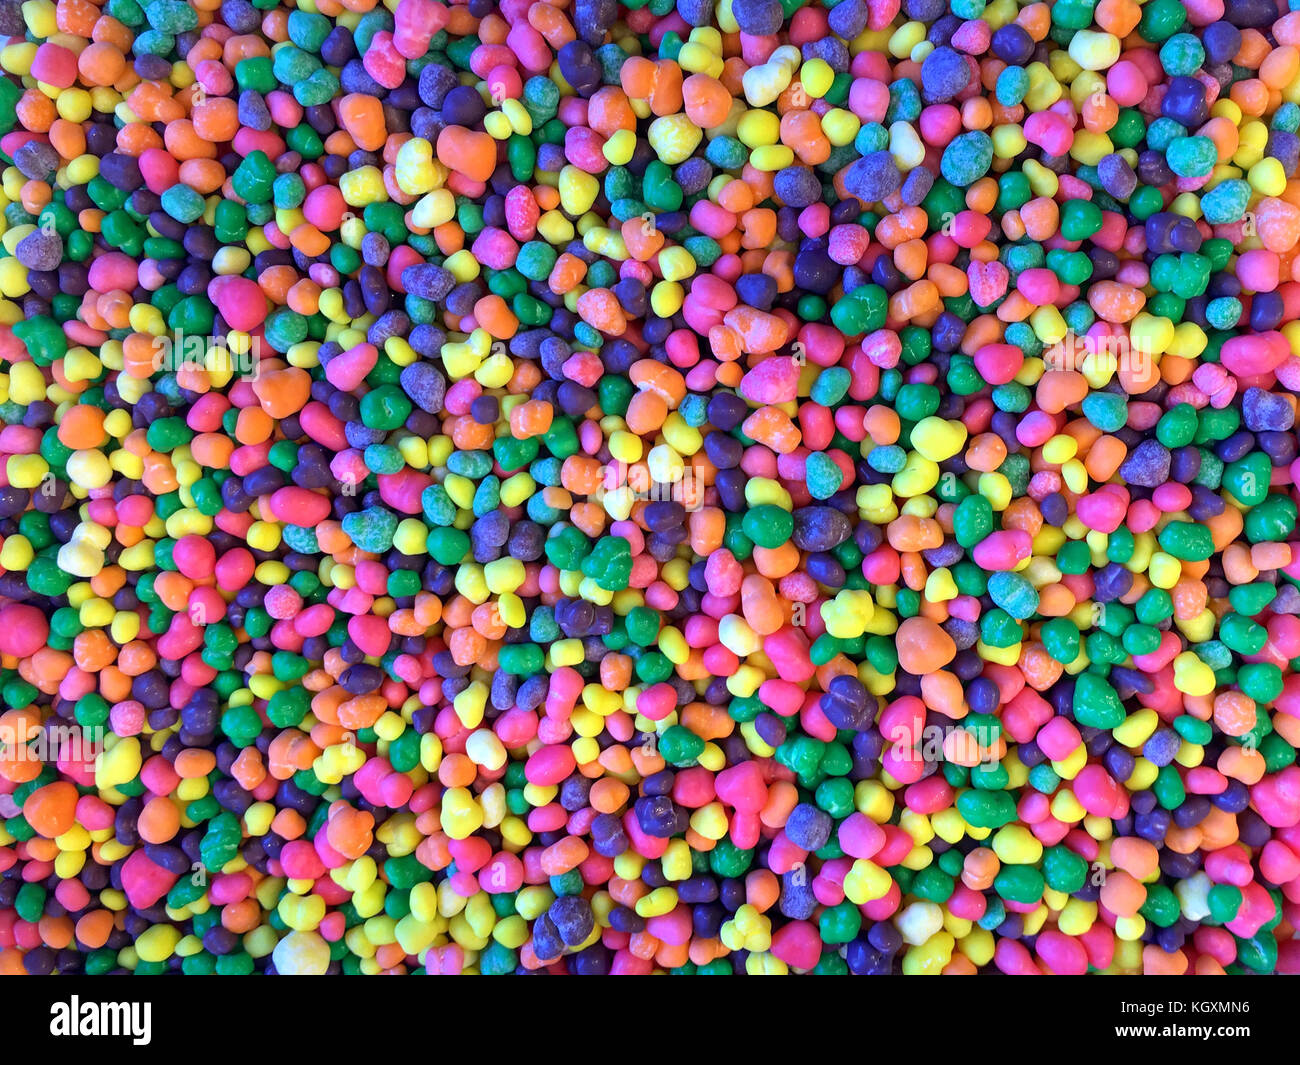 Close up on many colorful candy pieces. Bright colorful florescent colors. Flat lay top view background Stock Photo